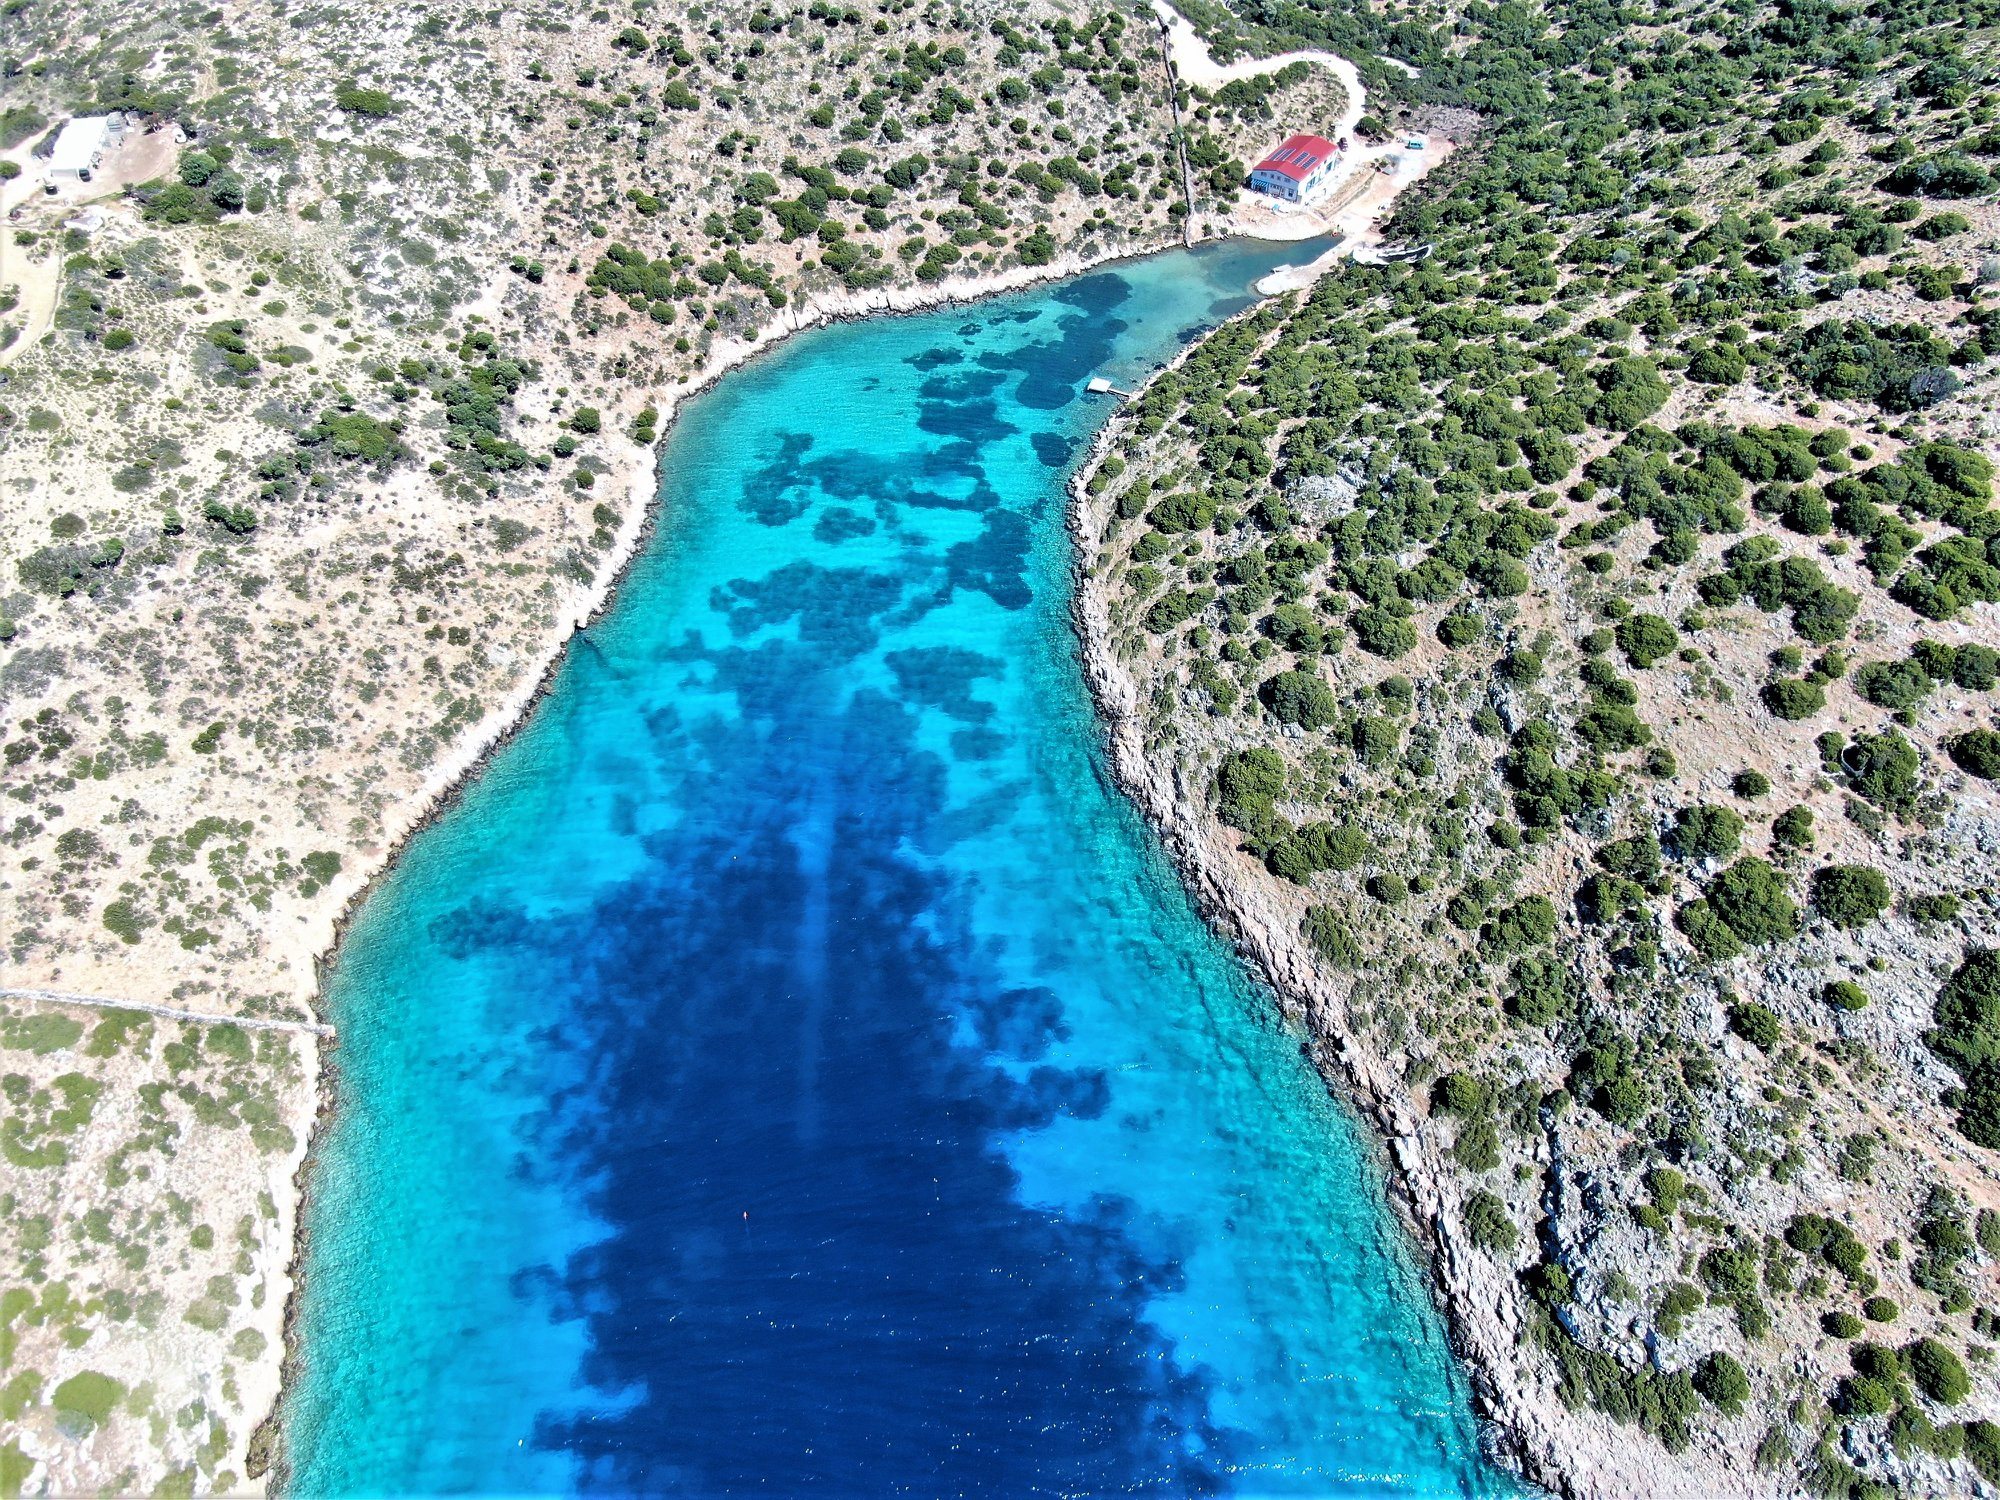 An aerial photograph of a clear, turquoise-coloured body of water